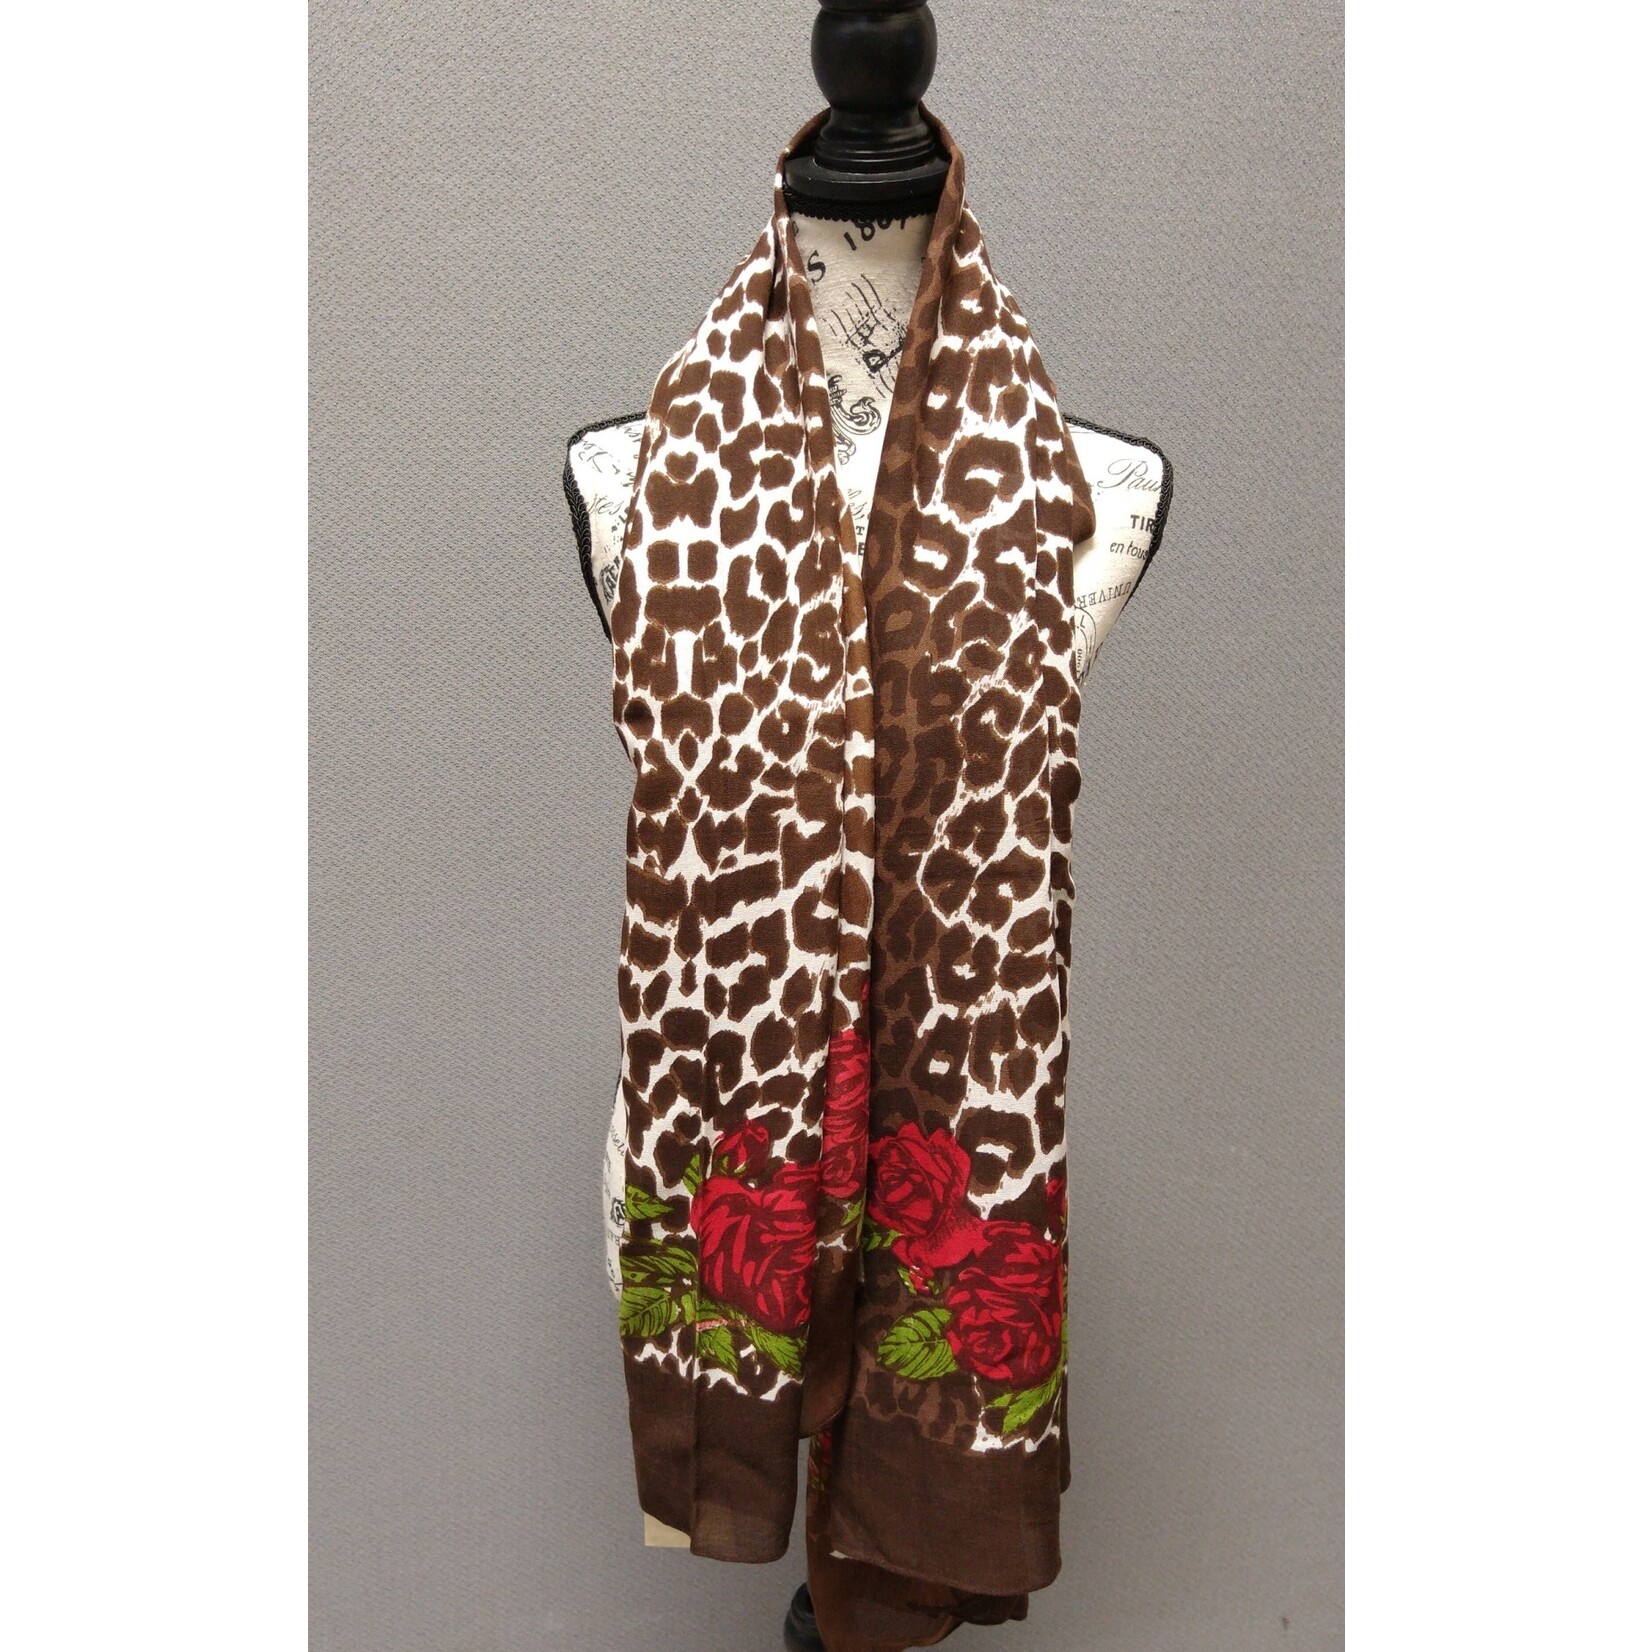 2CHIC Animal Print & Red Roses Scarf